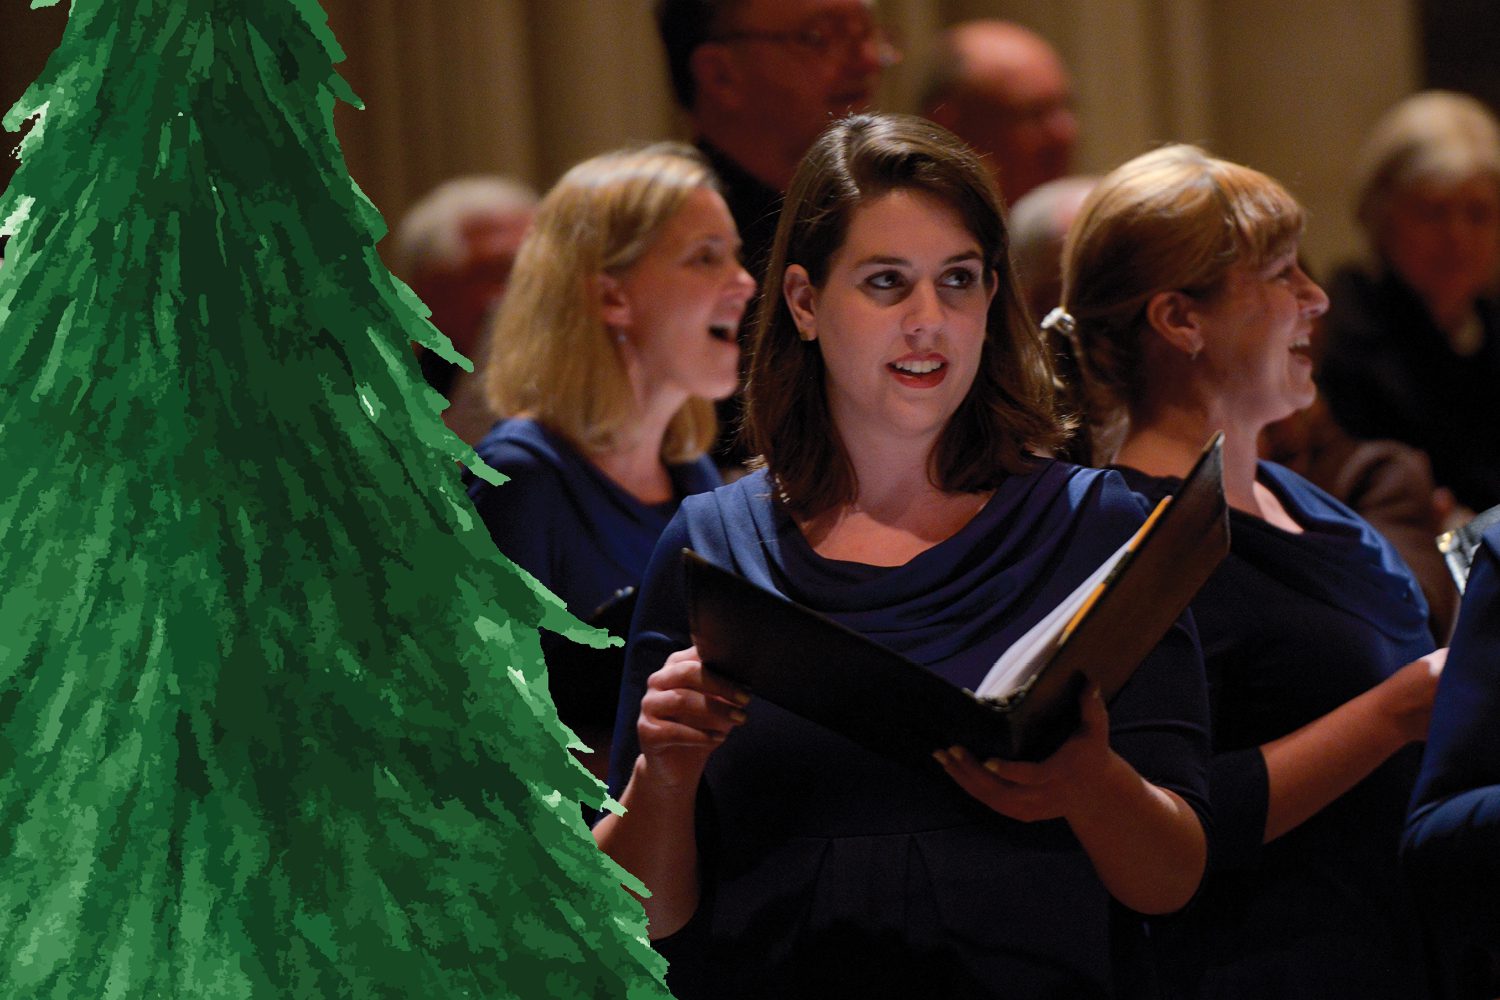 Cathedral Choral Society: Joy of Christmas | The Georgetowner